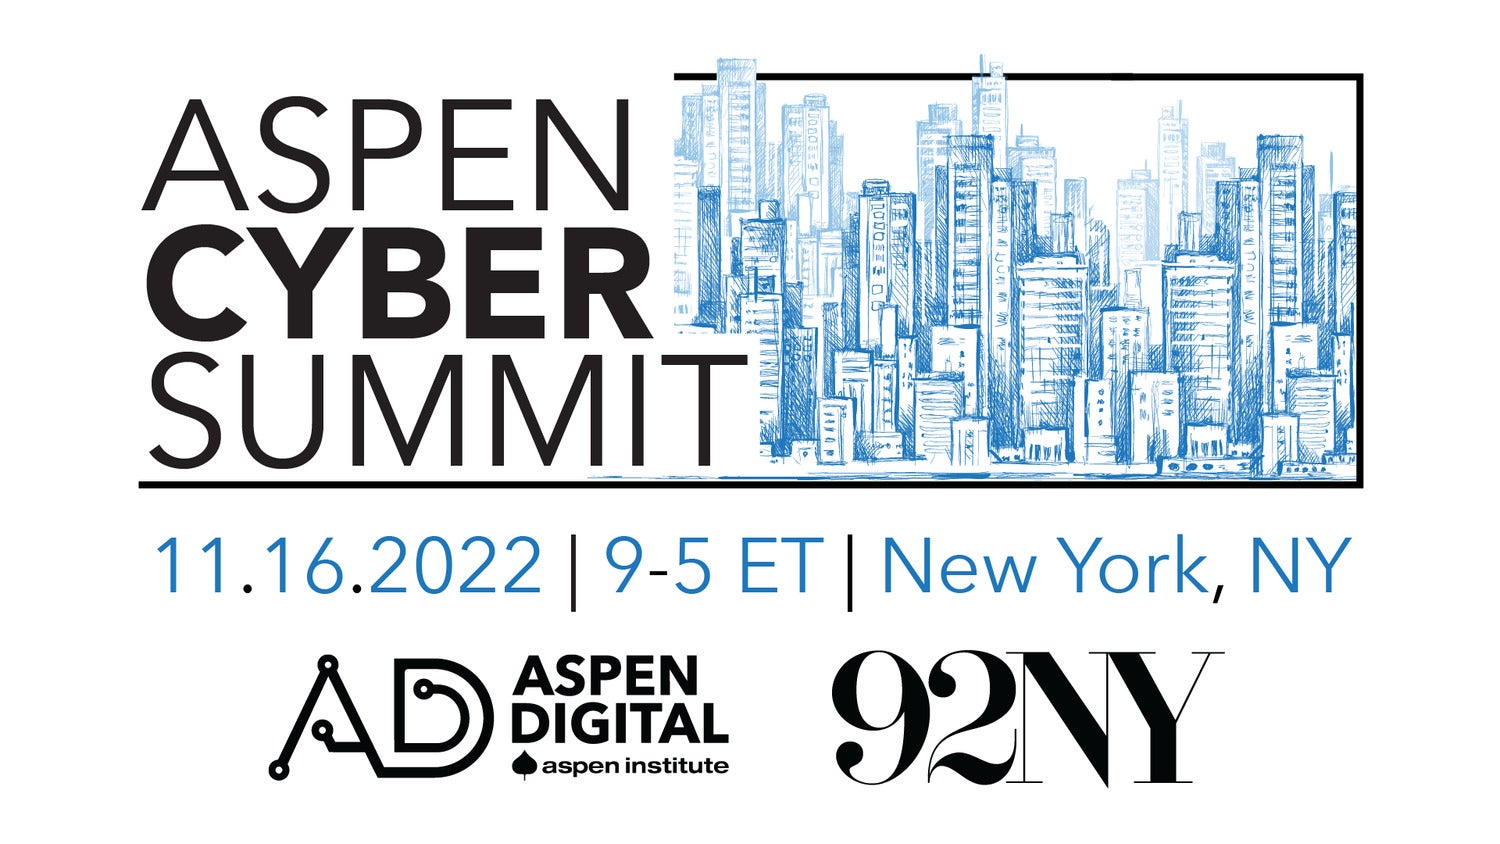 Aspen Cyber Summit Agenda to Feature Senior Leaders from US Government